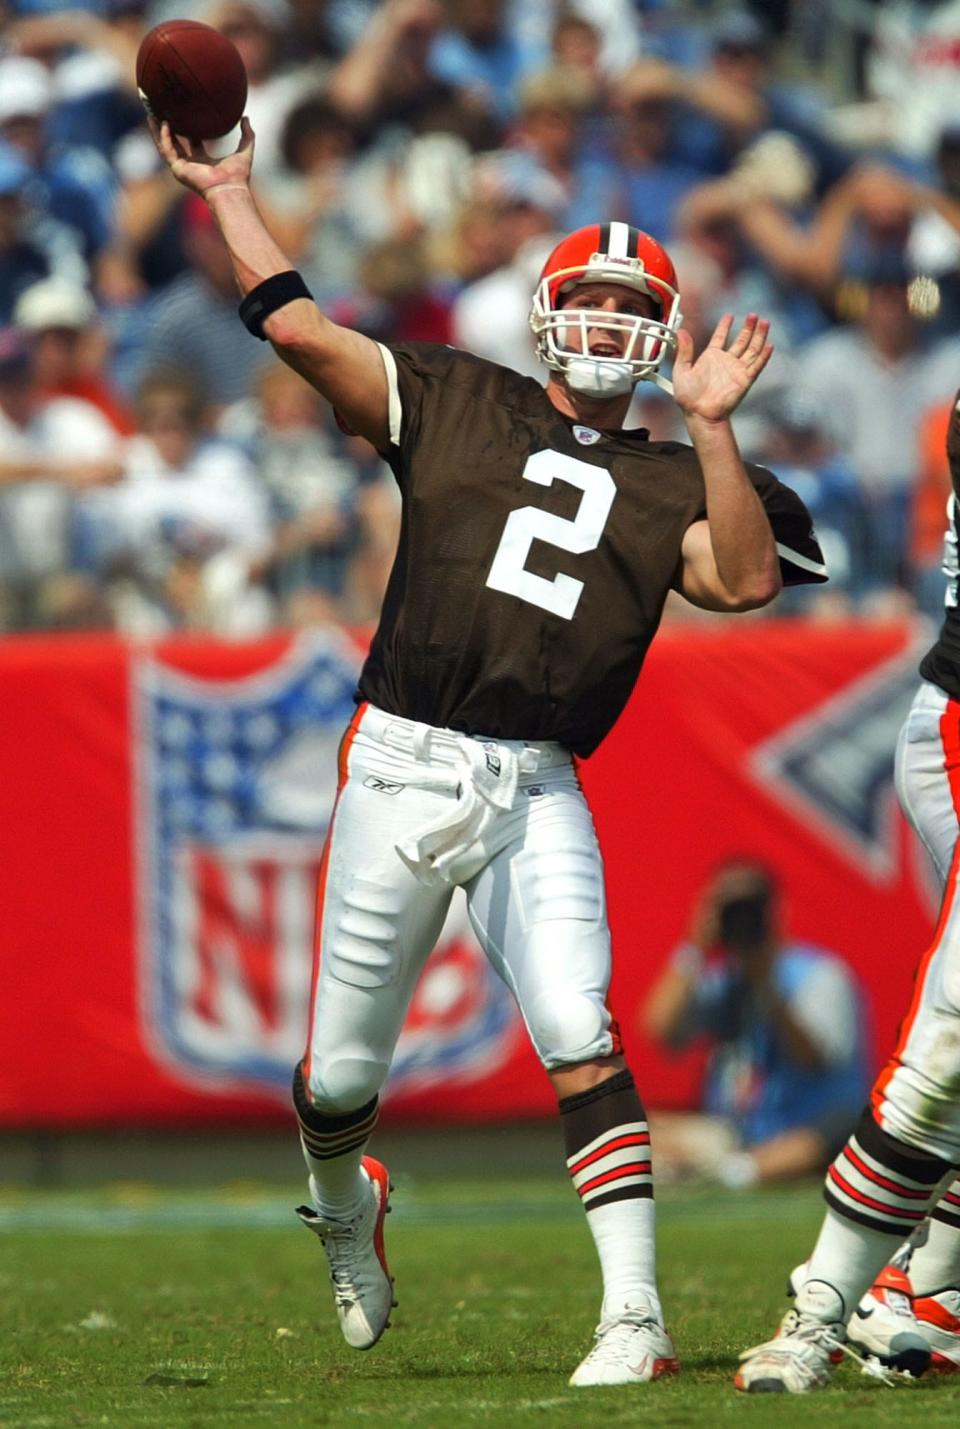 Browns quarterback Tim Couch throws against the Titans in the second quarter, Sunday, Sept. 22, 2002 in Nashville, Tenn. Couch passed for 326 yards and three touchdowns in the Browns' 31-28 overtime win over the Titans. (AP Photo/John Russell)